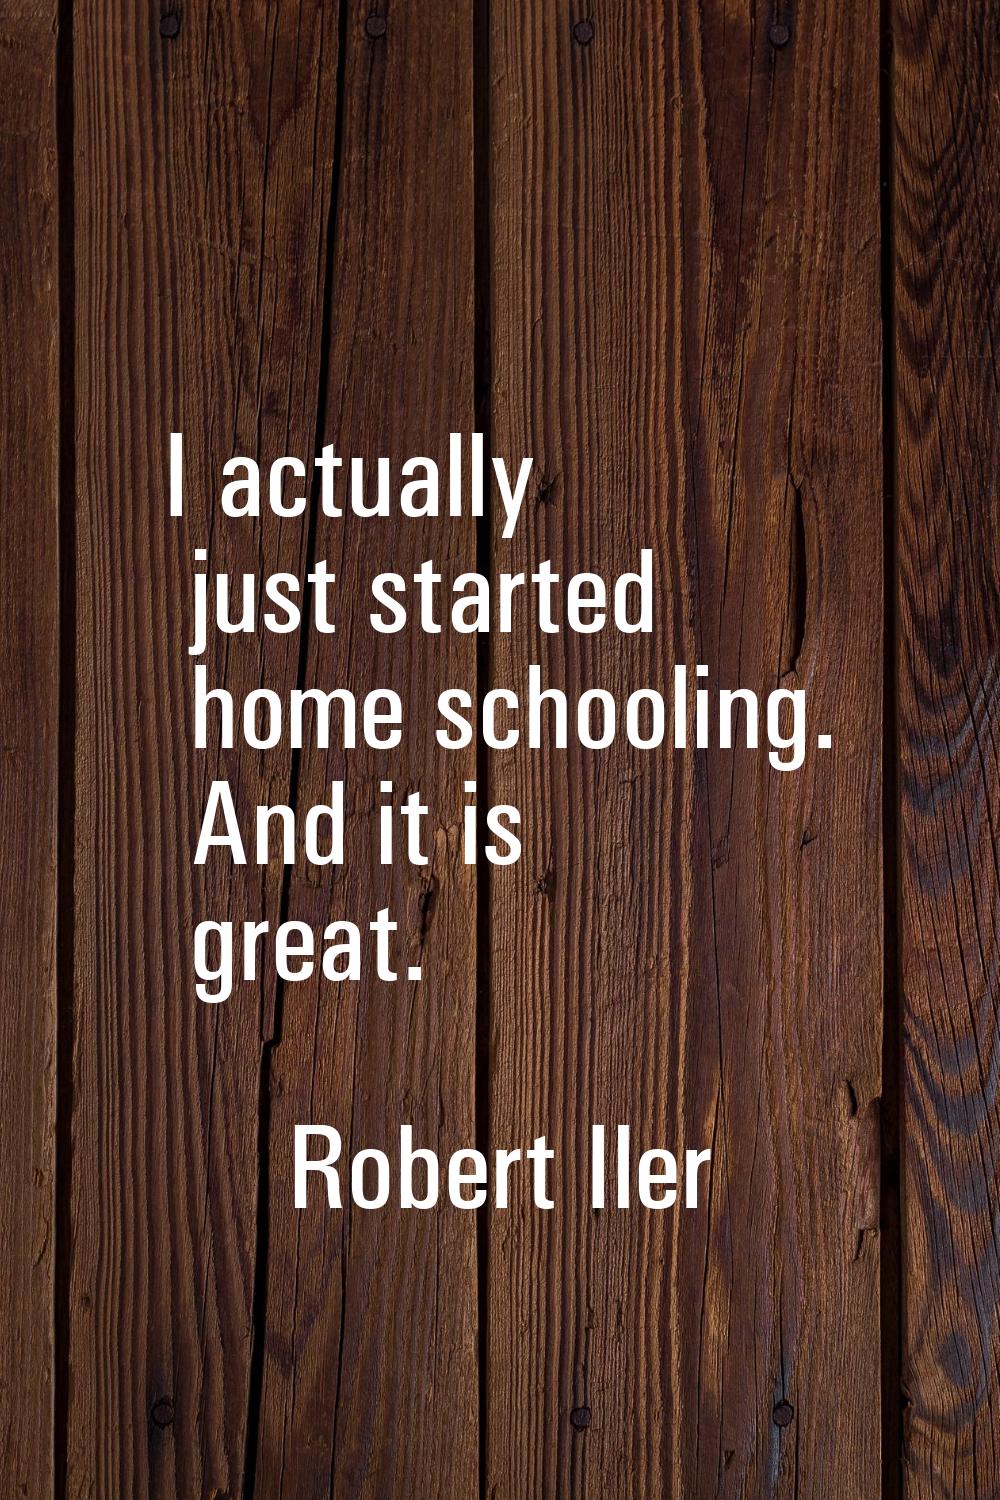 I actually just started home schooling. And it is great.